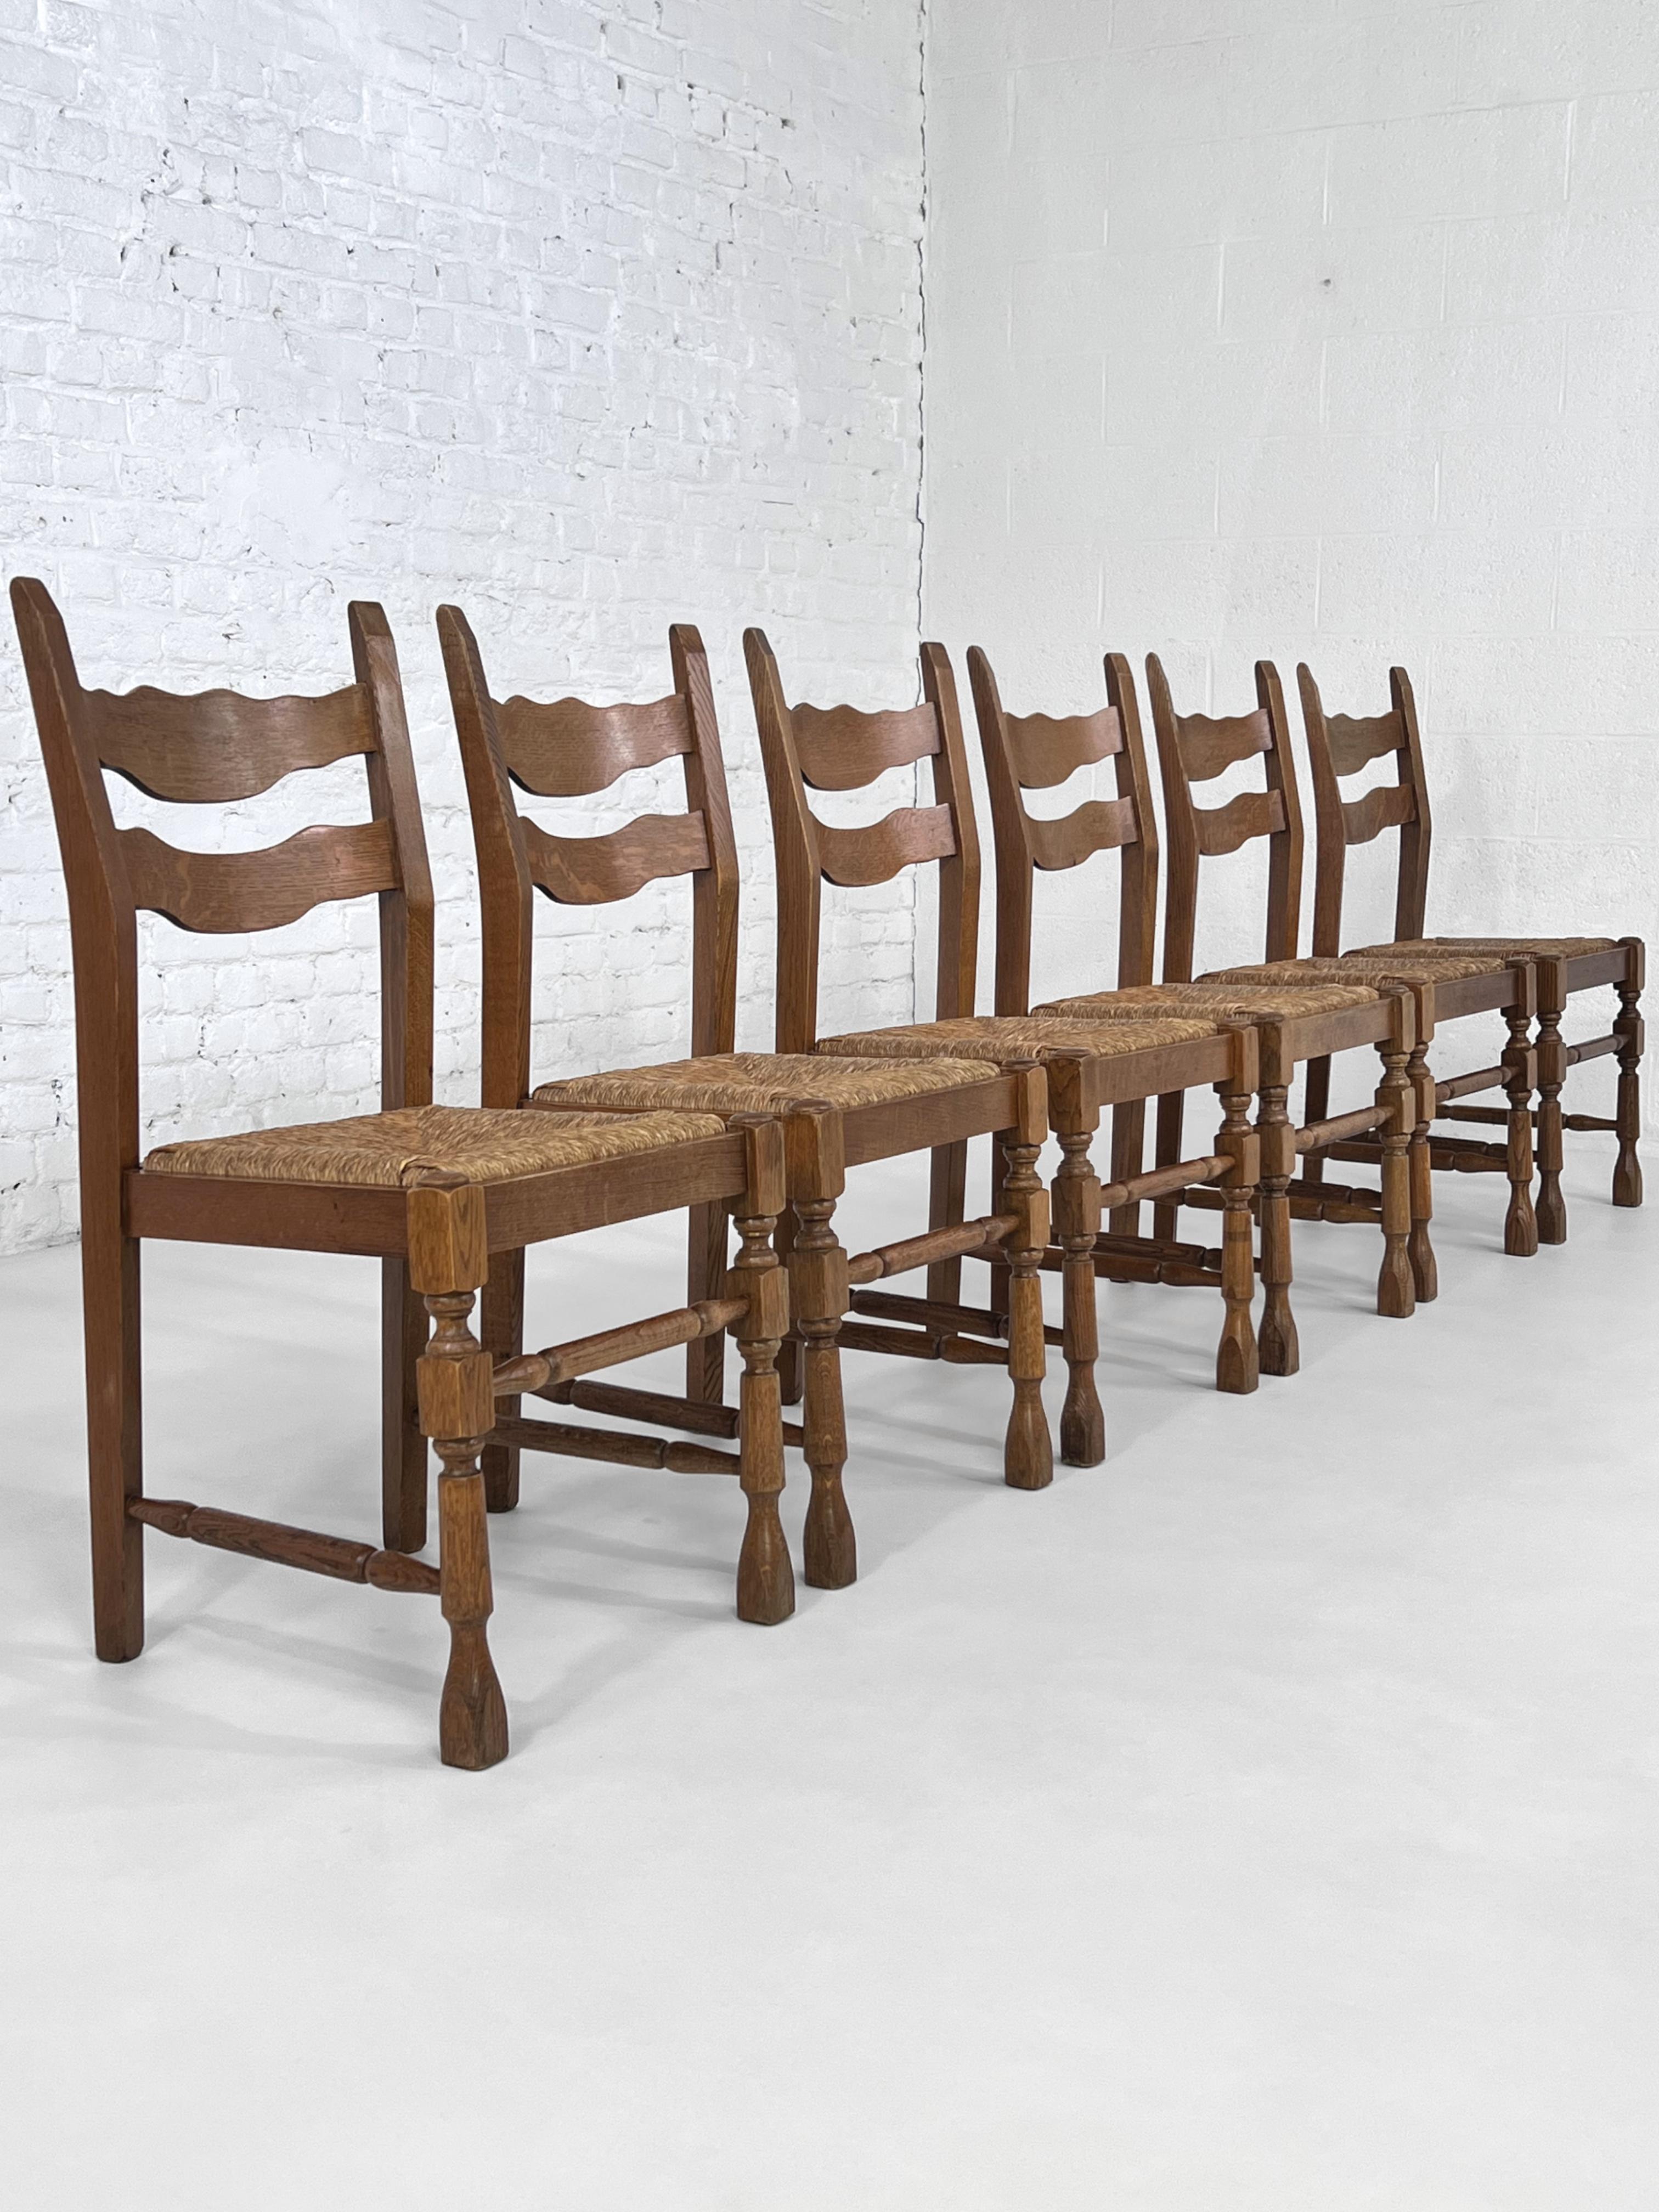 1950s Design Oak Wooden And Braided Straw Seats Set of 6 Chairs composed of a wooden structure adorned with a braided straw seat.